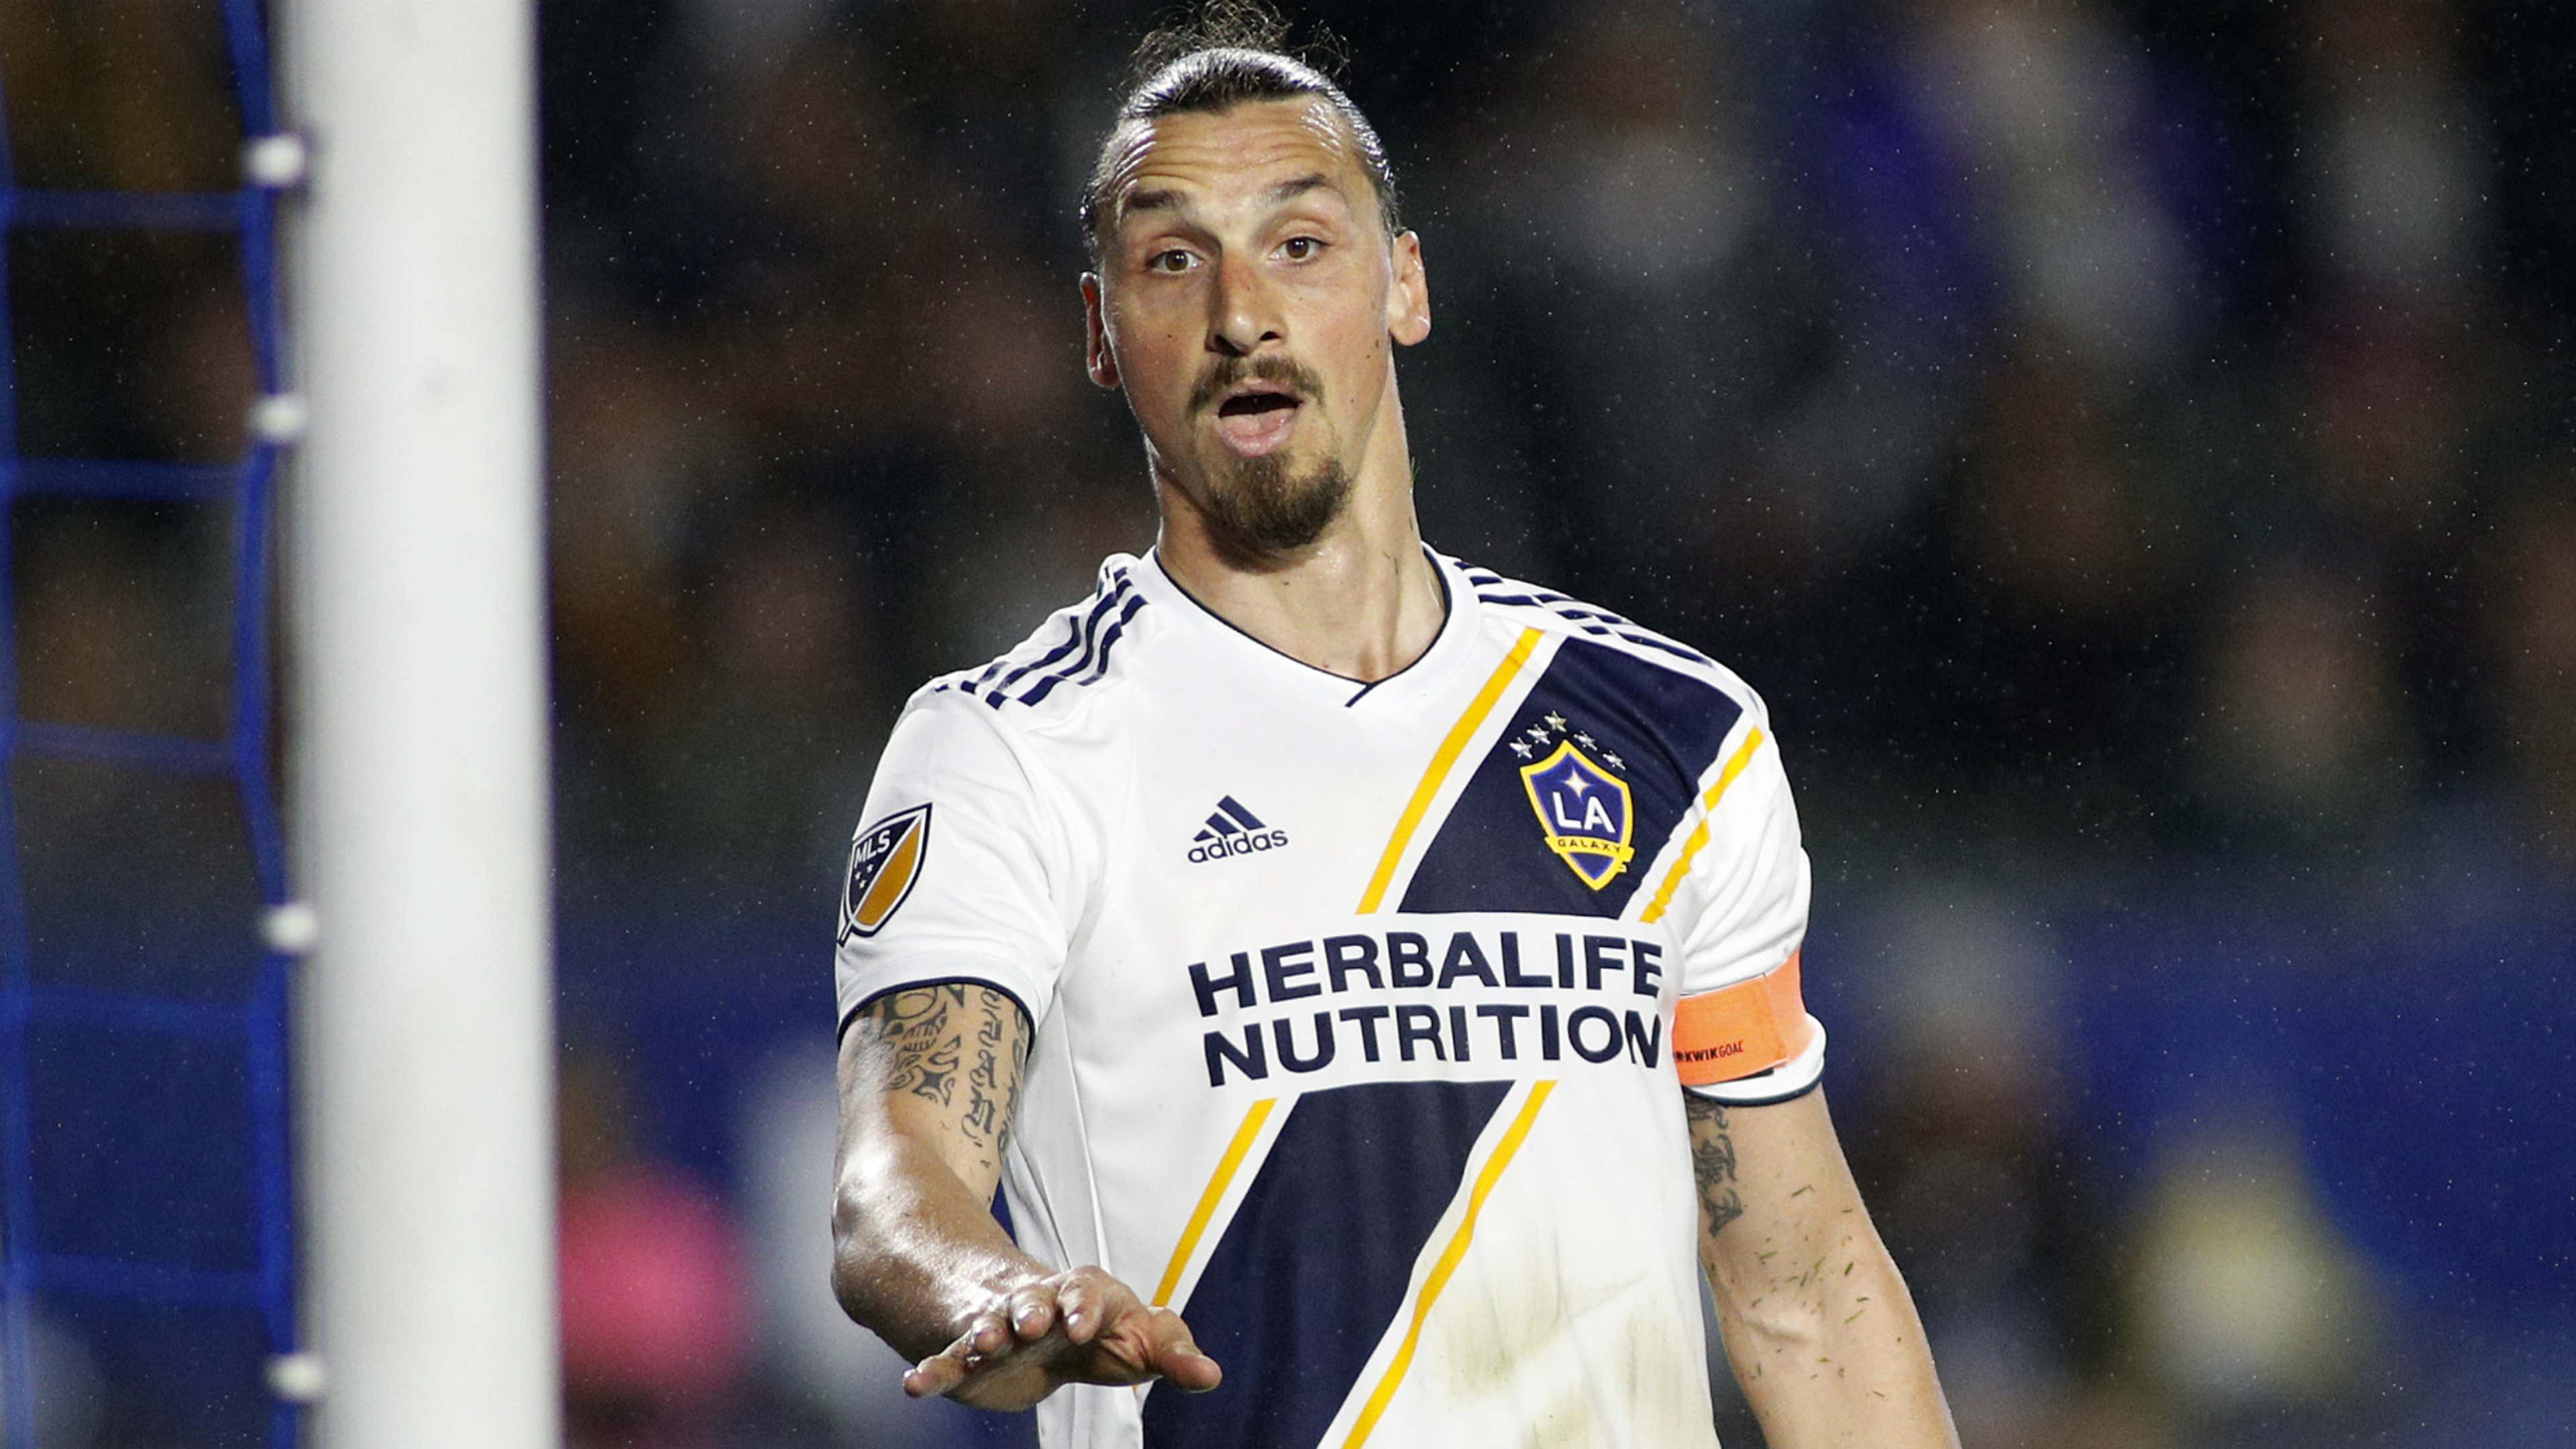 Zlatan Ibrahimovic Net Worth 2018 - How Much is He Worth Actually